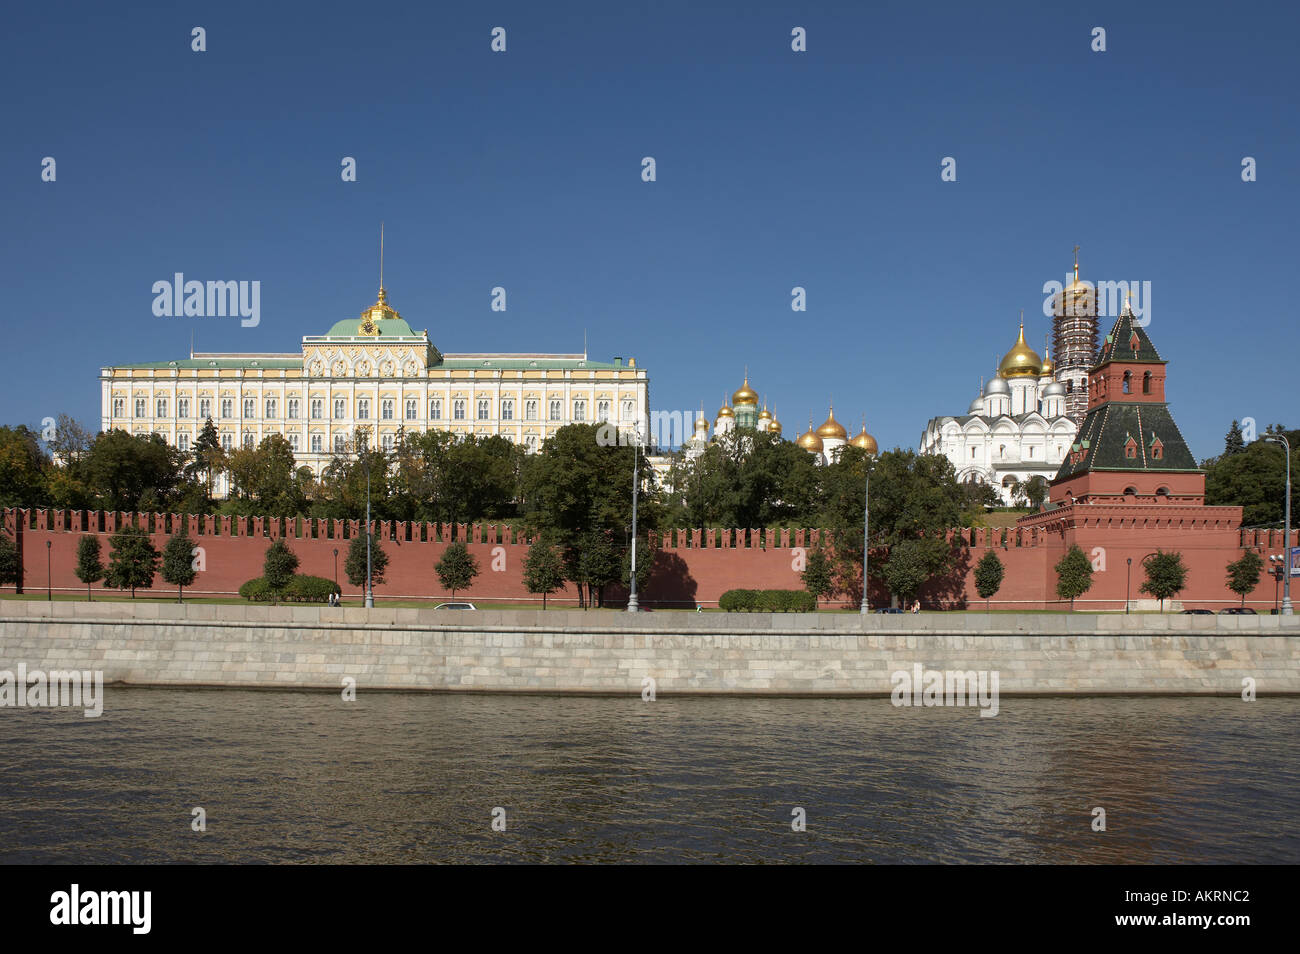 KREMLIN WALL GRAND PALACE ANNUNCIATION CATHEDRAL EMBANKMENT TOWER AND RIVER MOSCOW RUSSIA Stock Photo